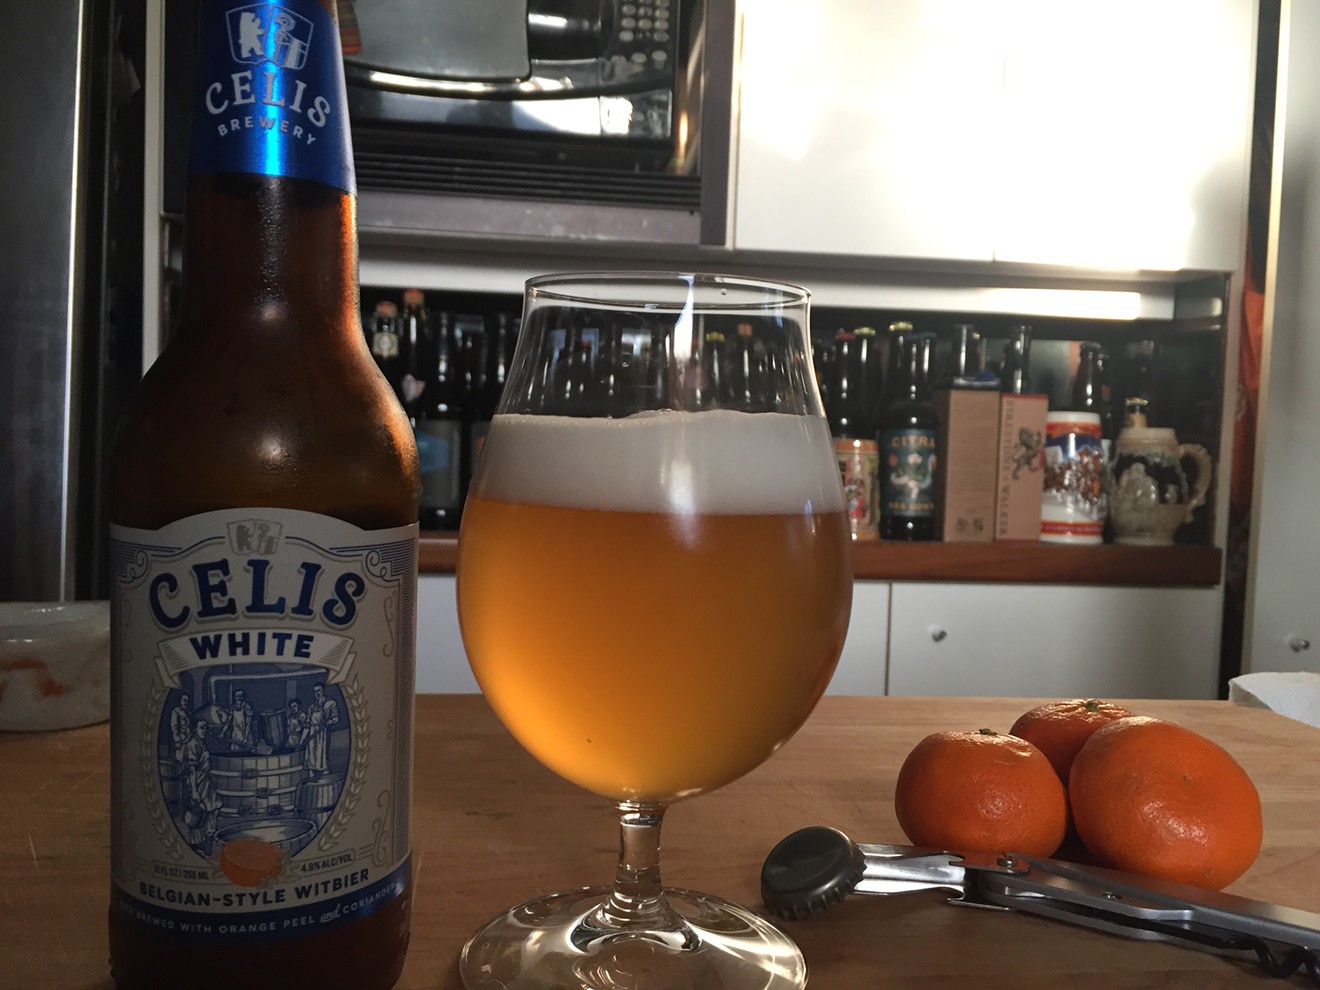 Celis White, Austin's original craft beer, is back. And it's beautiful.